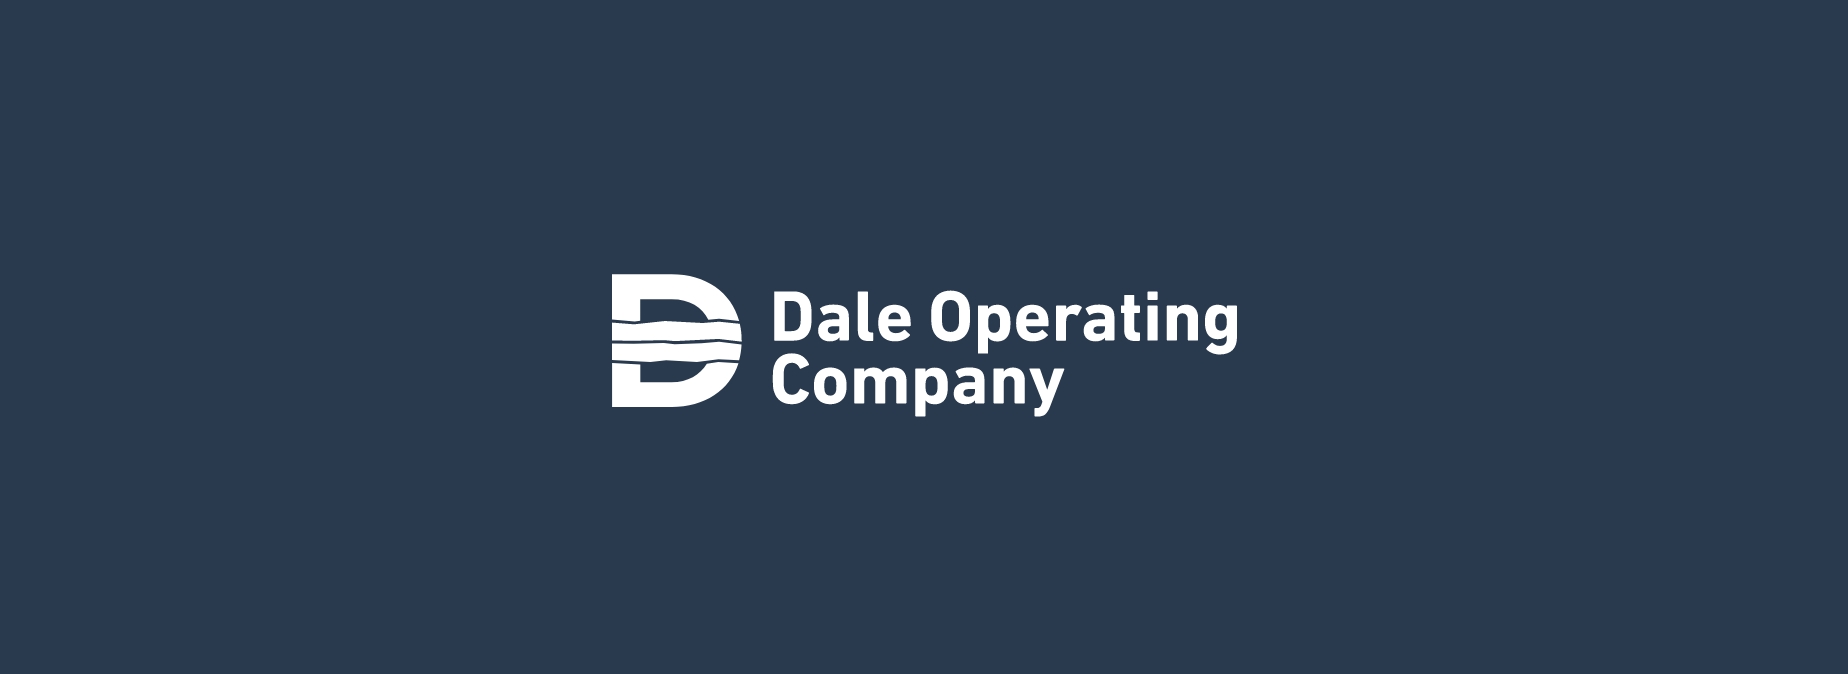 Dale Operating Logo Section